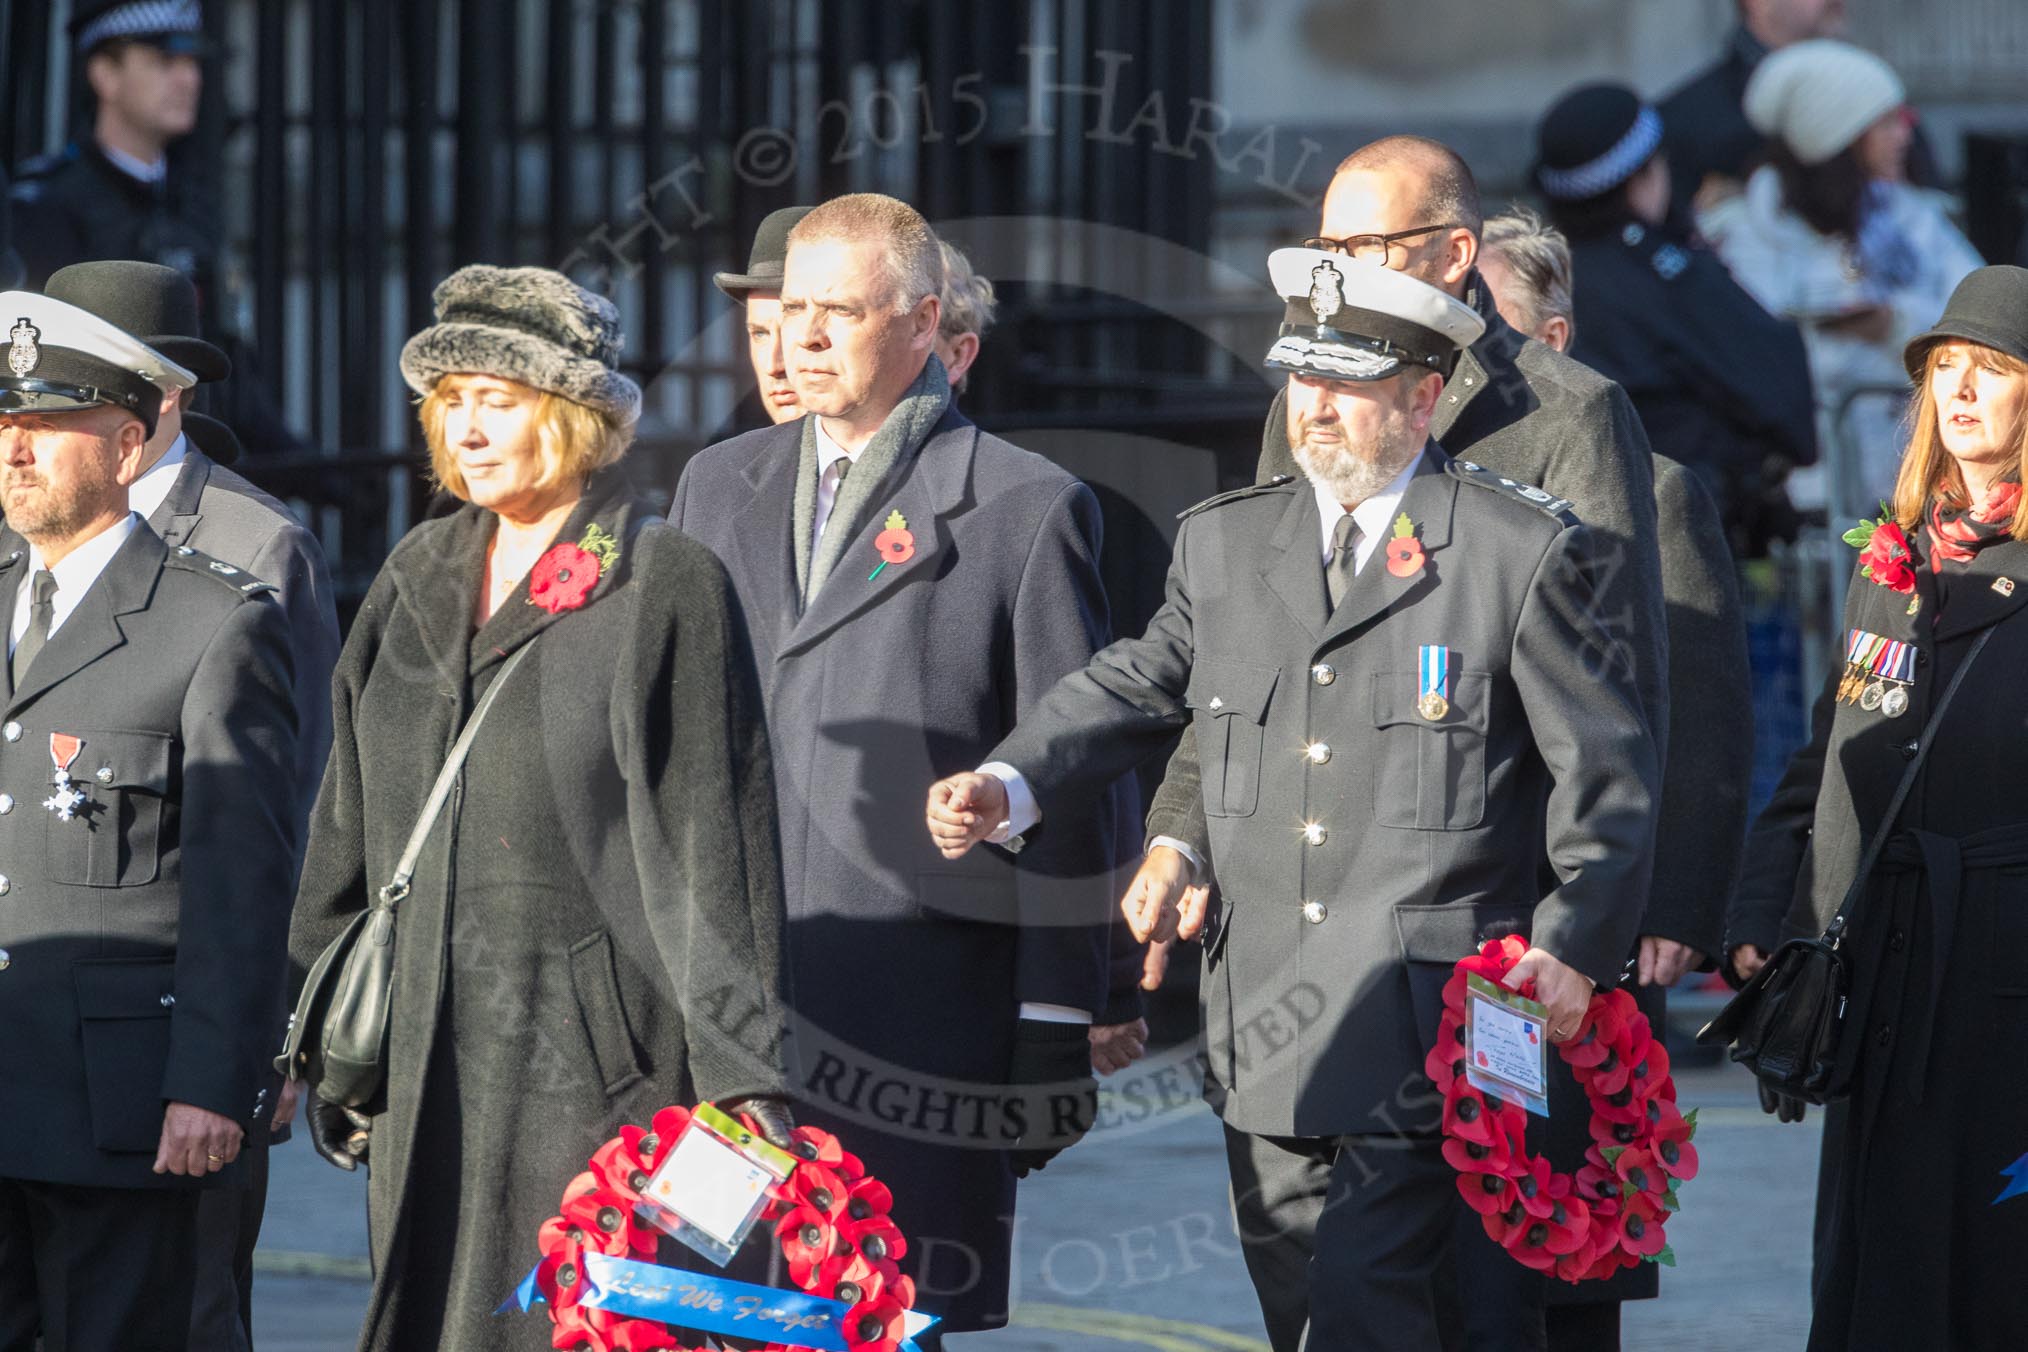 March Past, Remembrance Sunday at the Cenotaph 2016: M52 Munitions Workers Association.
Cenotaph, Whitehall, London SW1,
London,
Greater London,
United Kingdom,
on 13 November 2016 at 13:20, image #3065